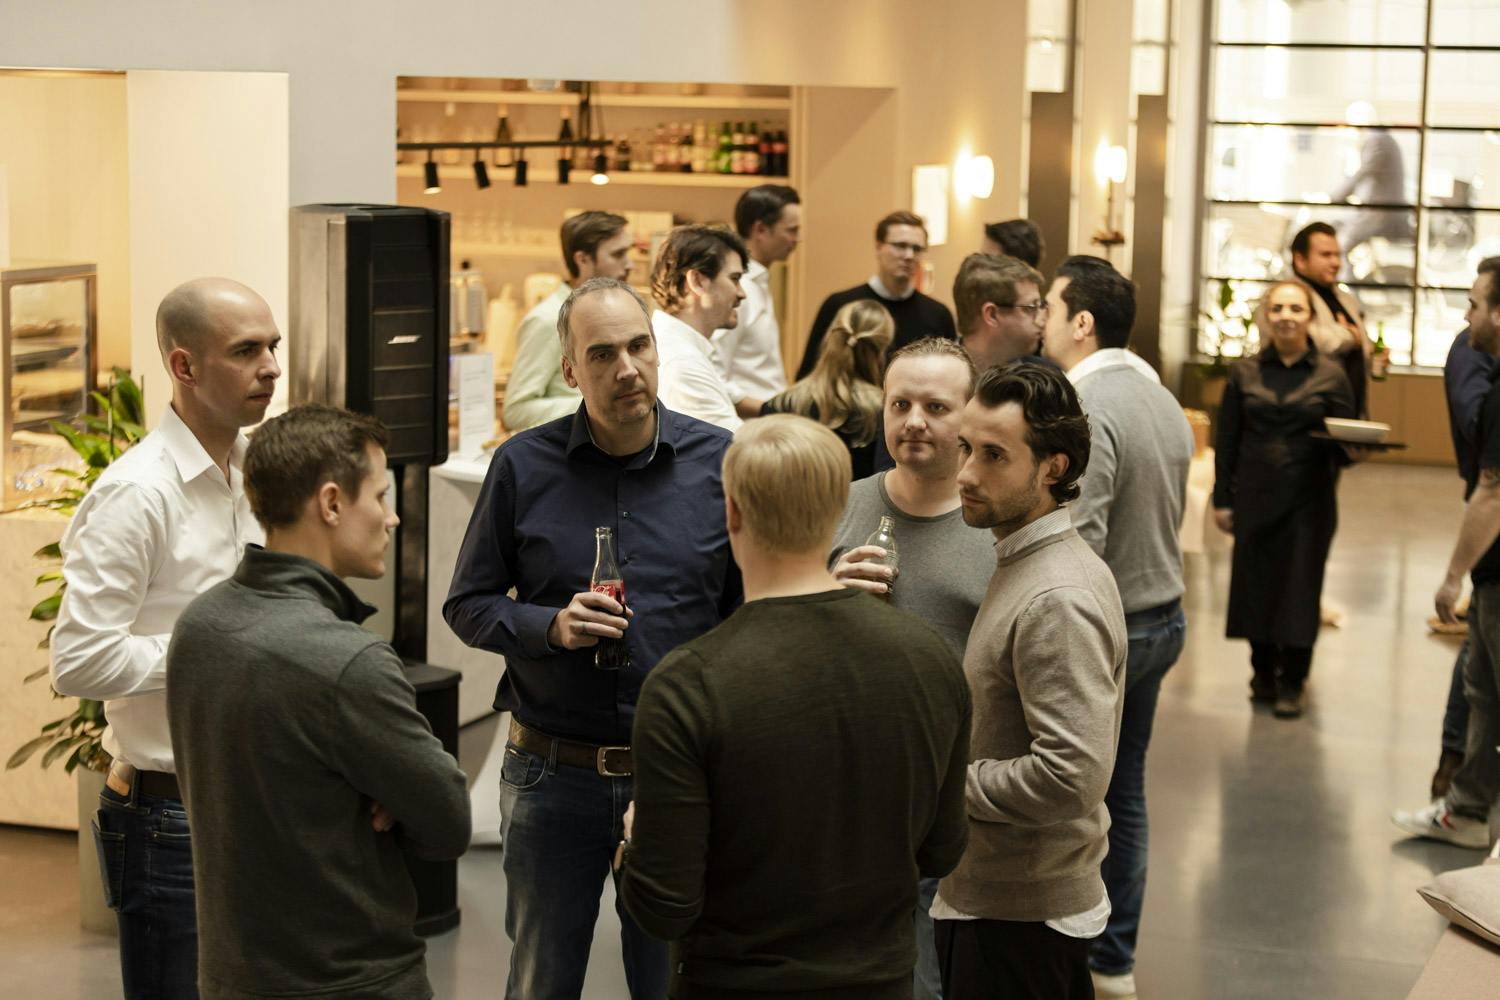 Welcoming atmosphere of the Finance 4 Startups event. (Photo: Andreas Hornoff)